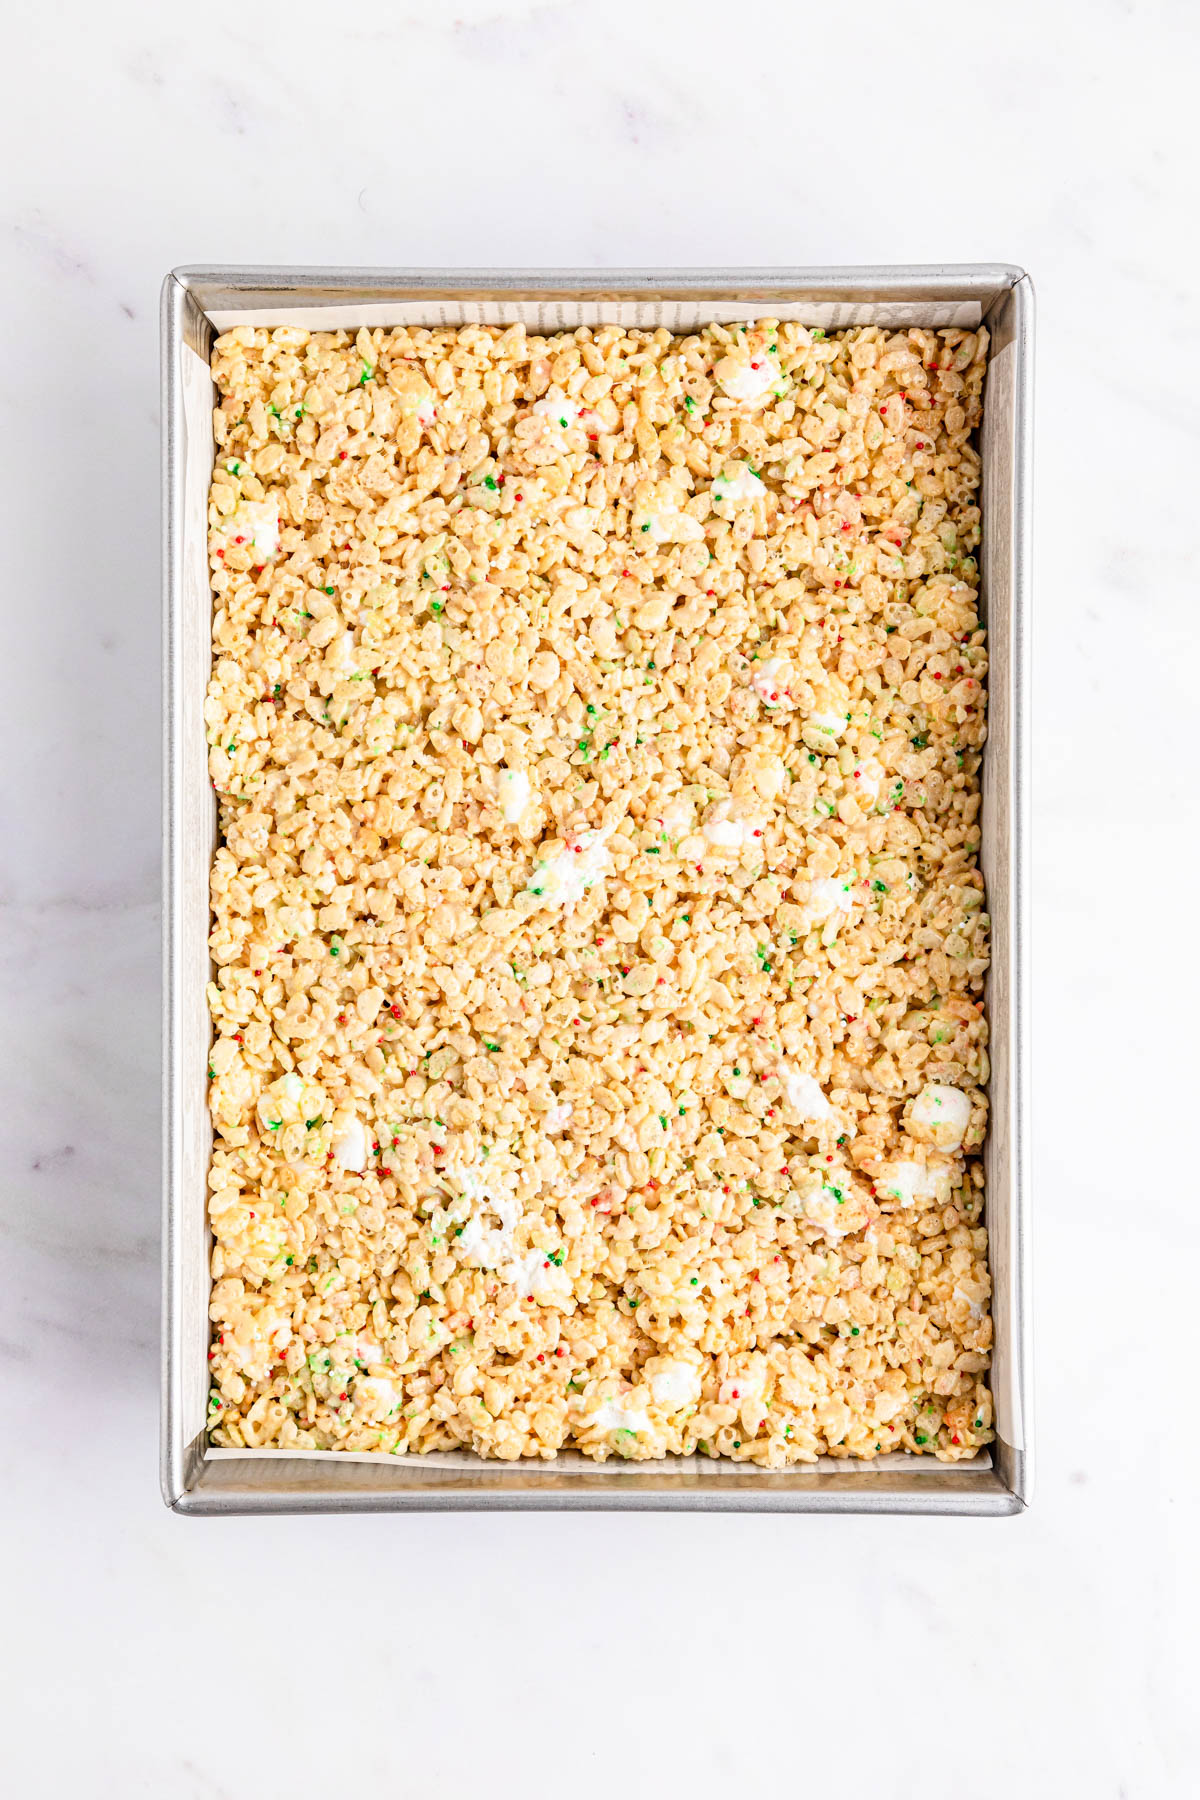 A baking pan filled with Rice Krispie Treats